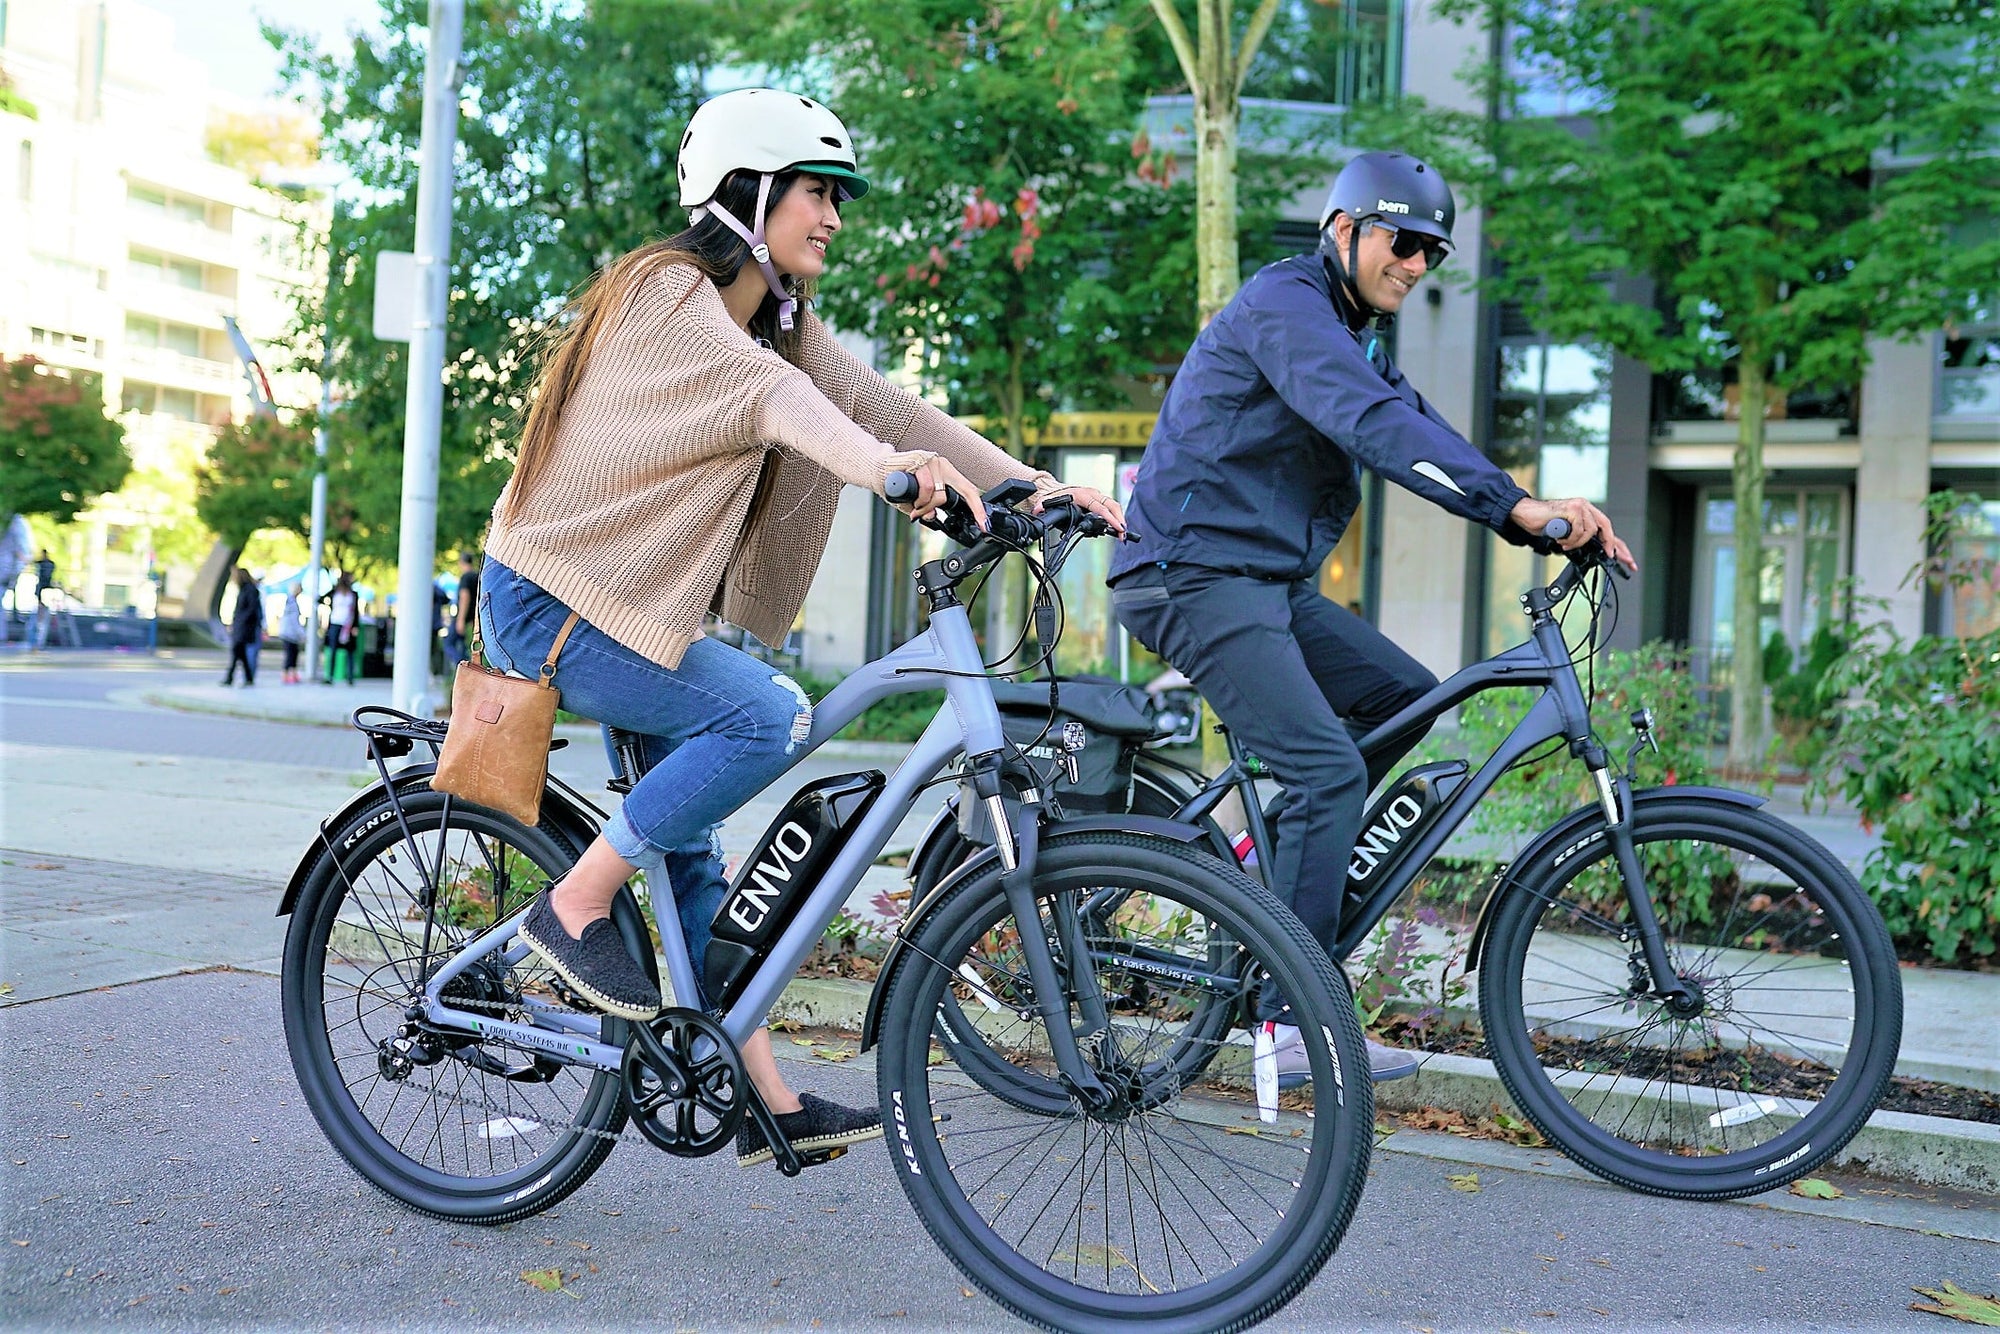 What Type of Maintenance does an E-Bike Need?